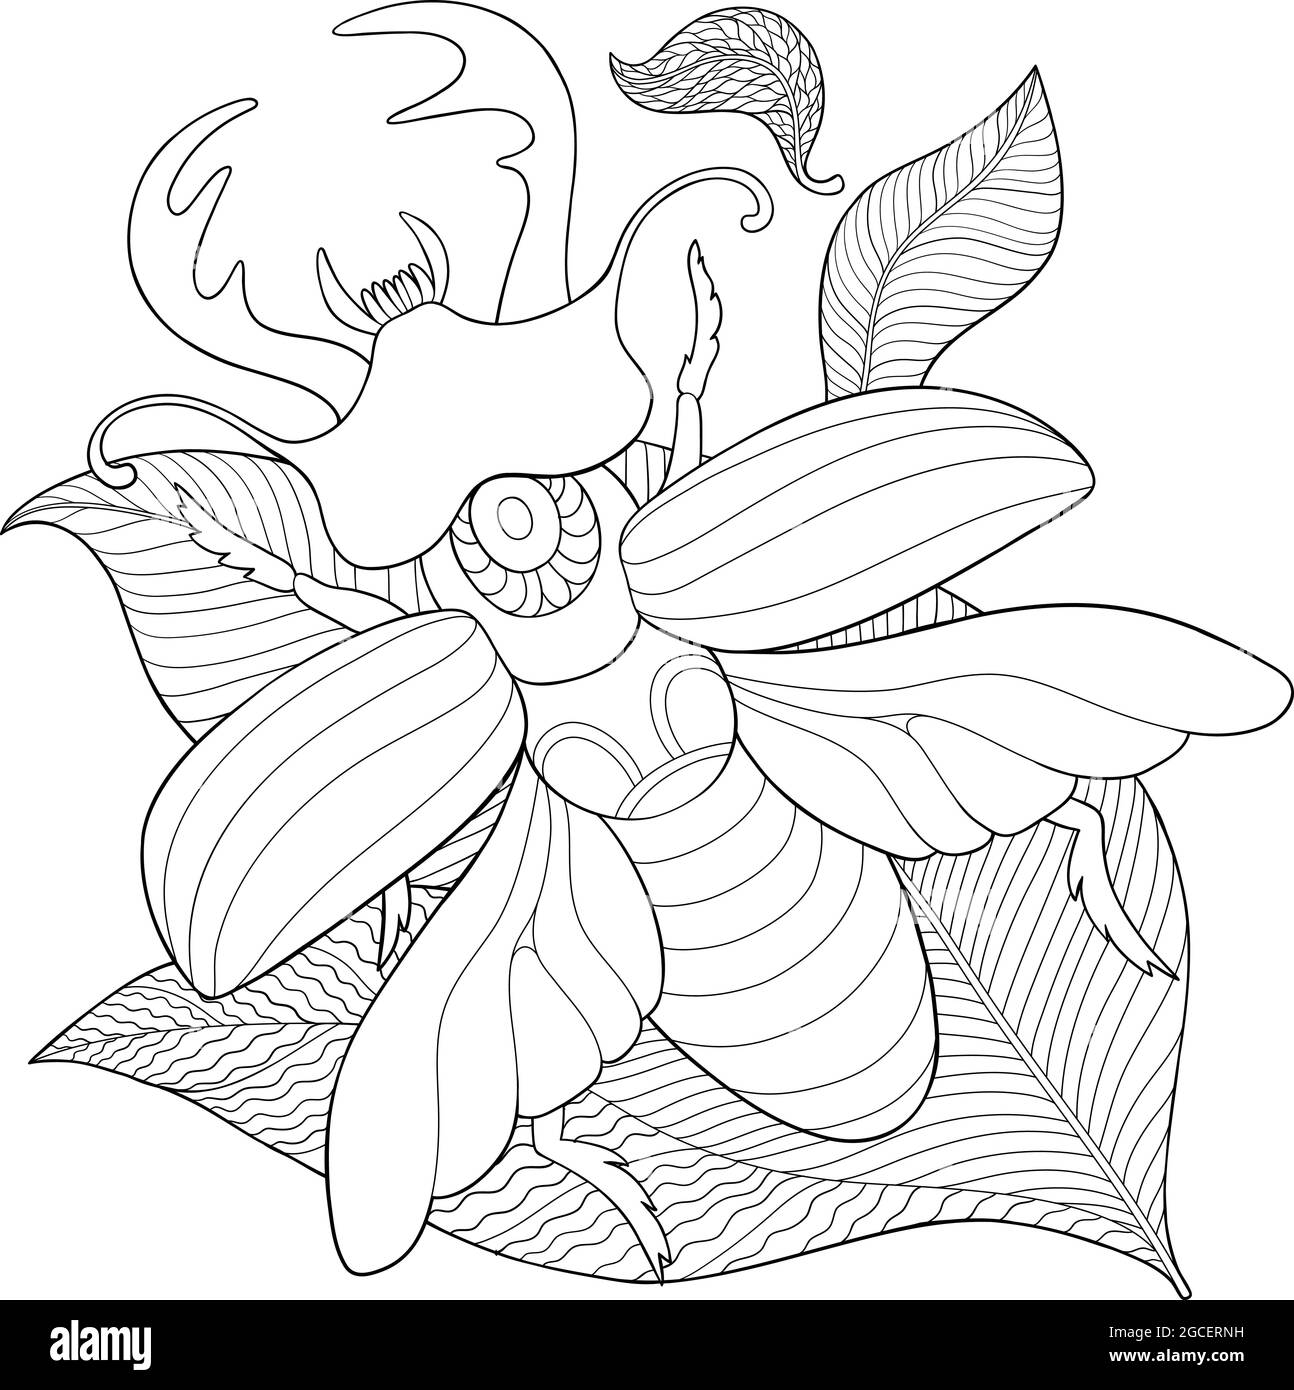 Alternative Beauty Collection - Stag Beetle. Stag beetle coloring book, black and white drawing Stock Vector